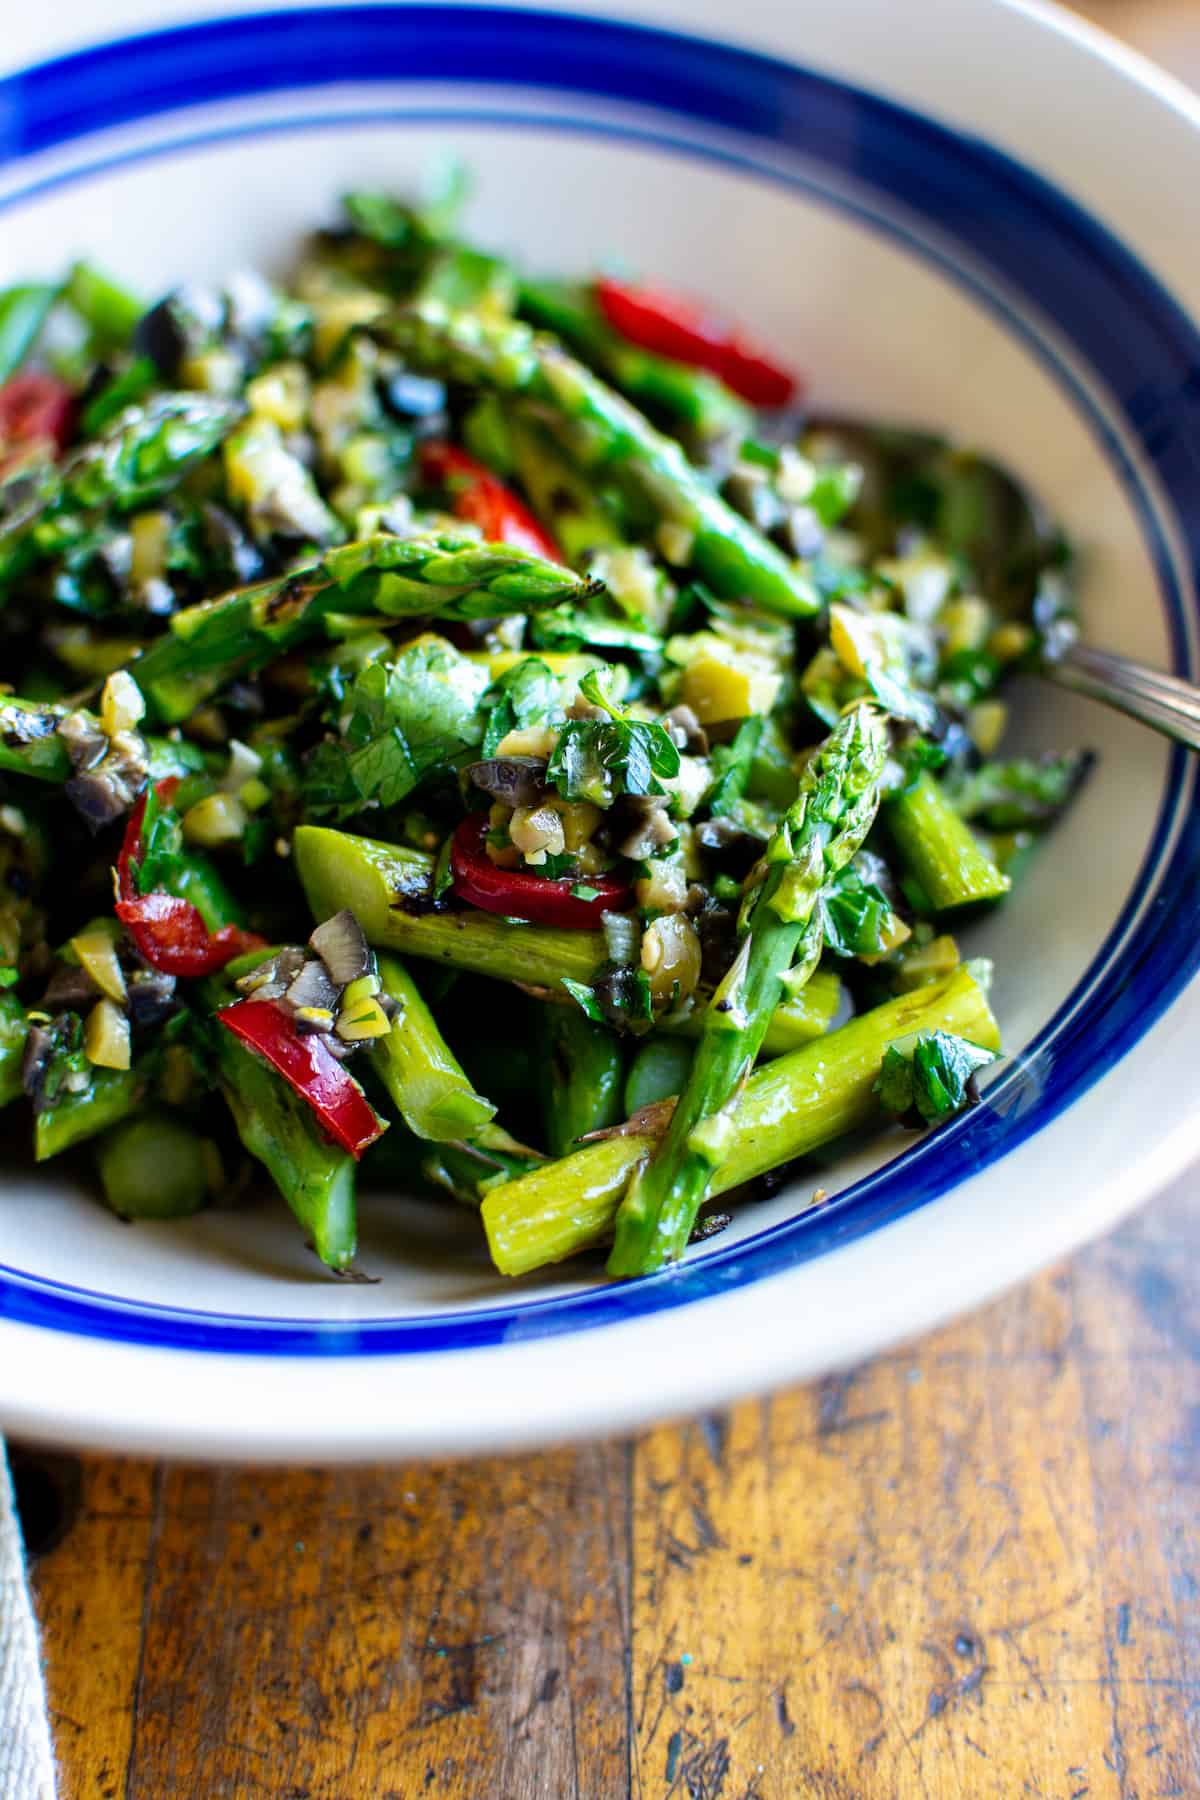 Grilled asparagus by itself is simple and delicious but tossing them with a chunky dressing of buttery California olives, bright lemon, and herbs transforms an ordinary weeknight dinner into something extraordinary. #grilledasparagus #asparagus #veganrecipe #glutenfreerecipe